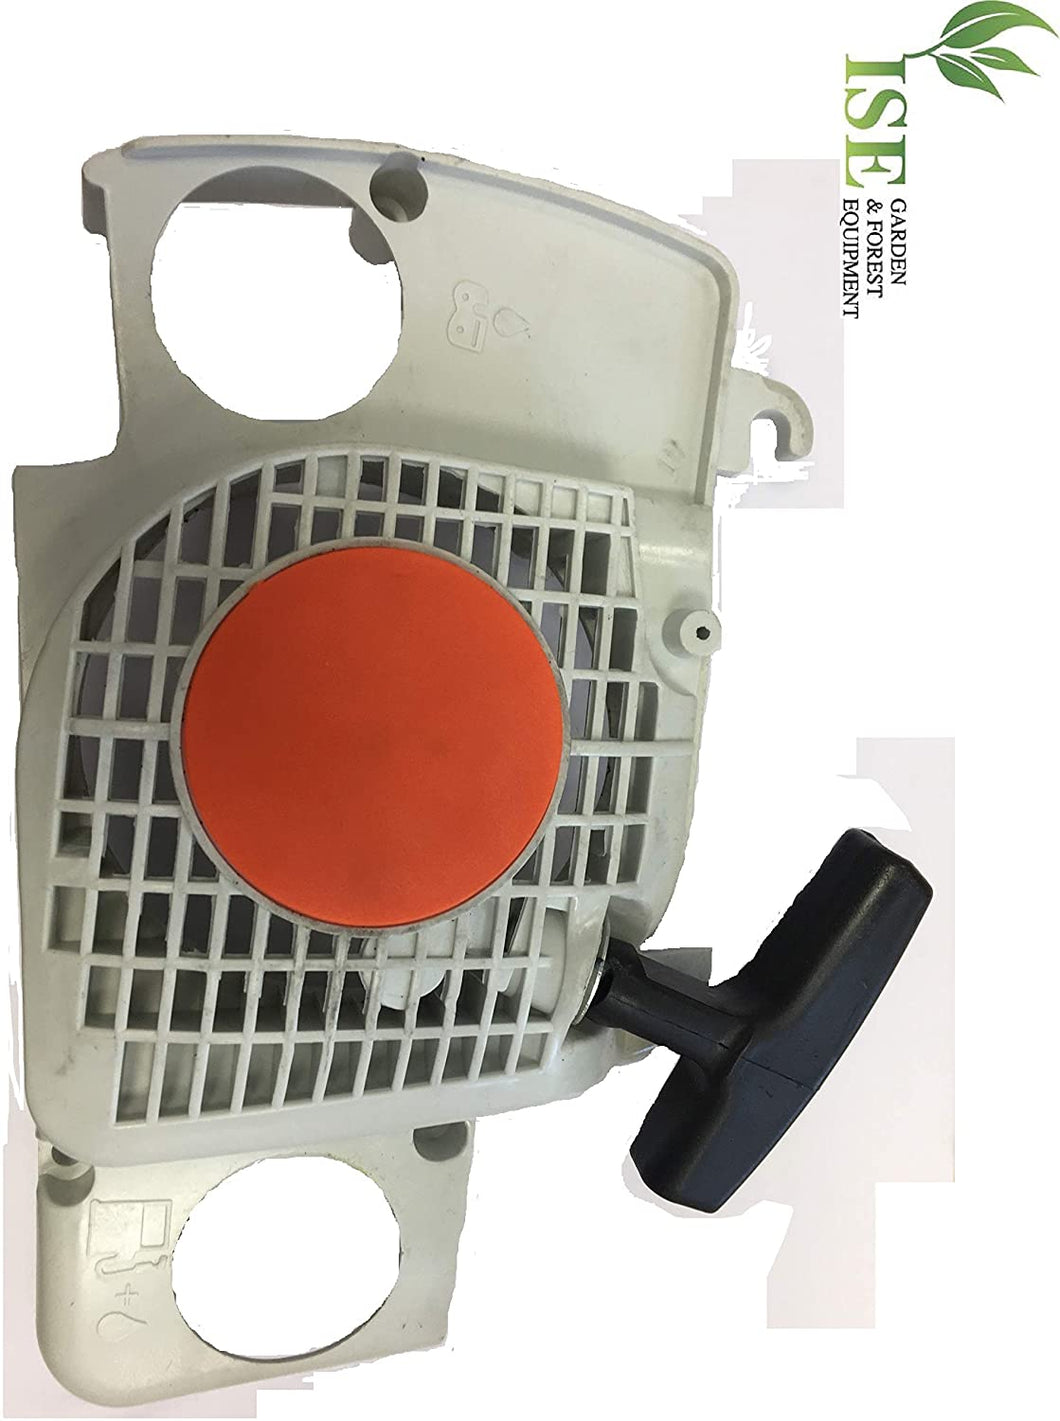 ISE Replacement Recoil Starter Assembly for Stihl MS170 C Chainsaw. Replaces Part Numbers: 1130 080 2100